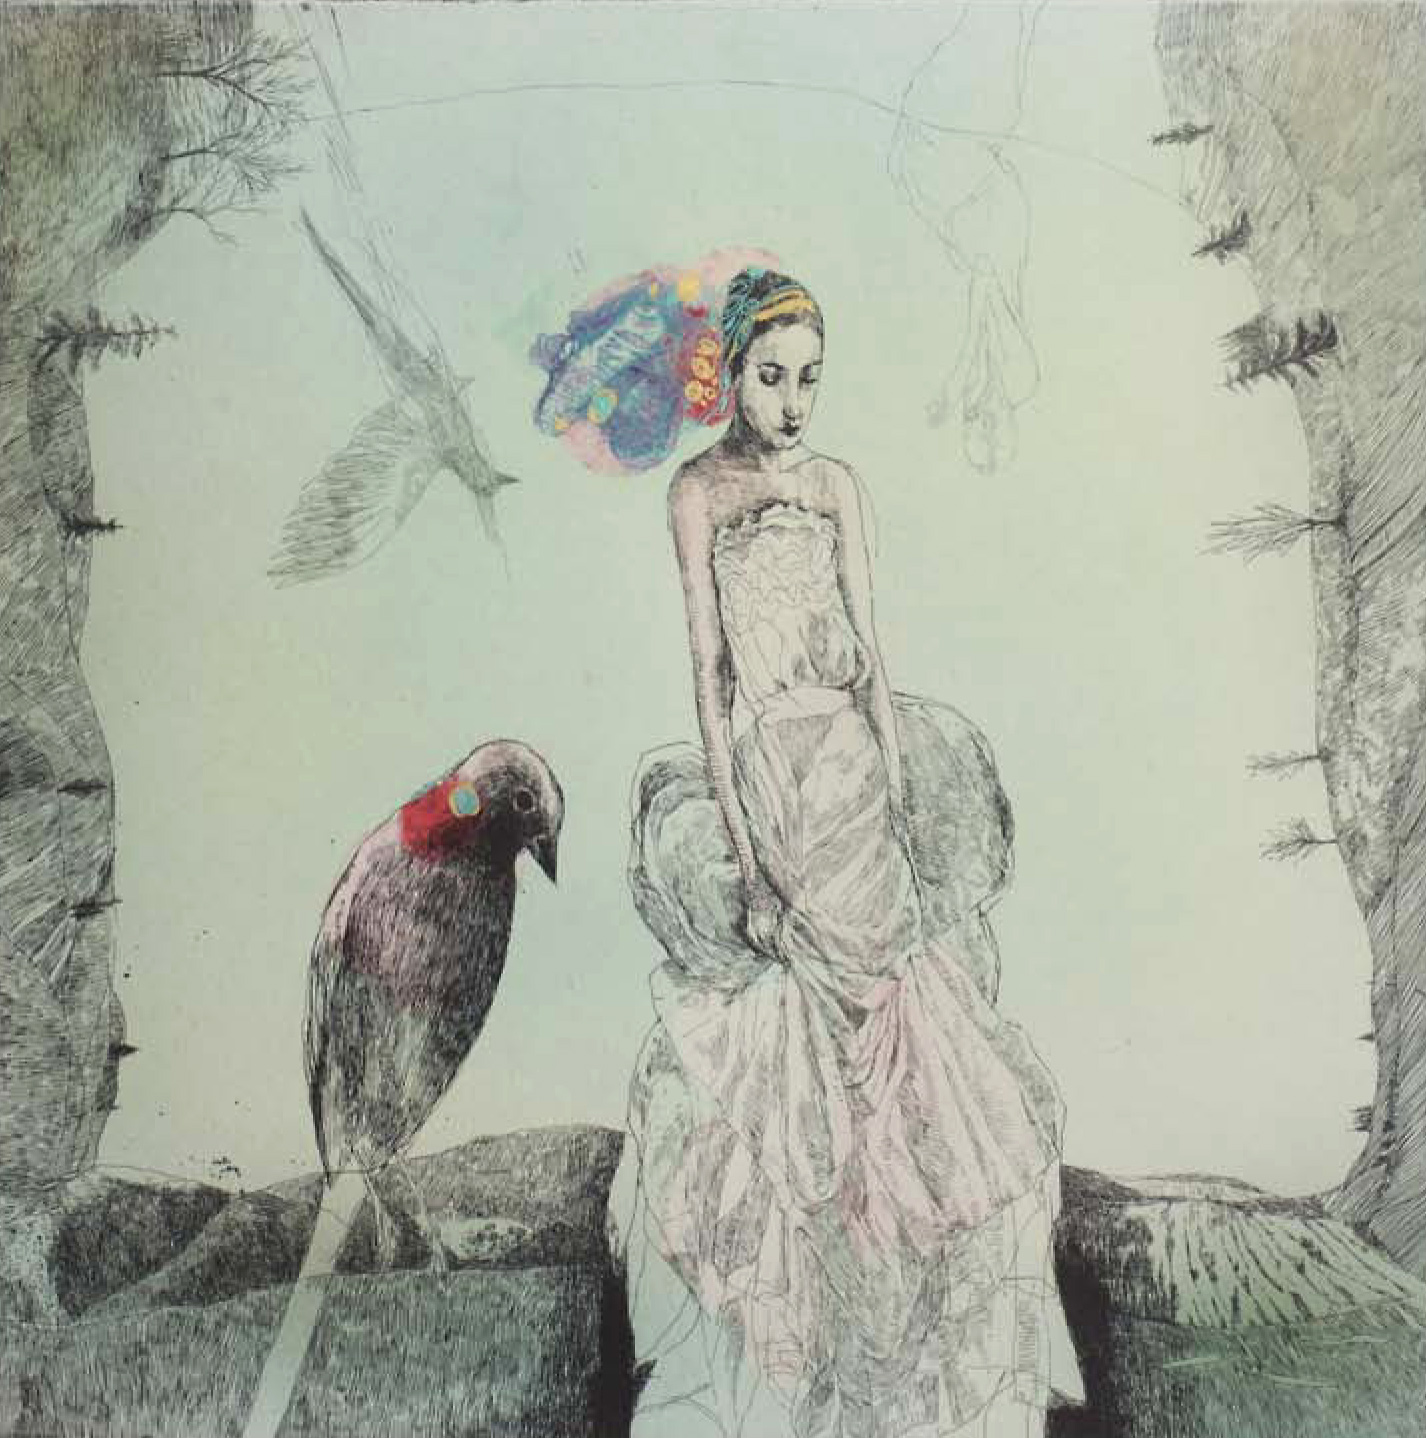 Katarína Vavrová, Untitled (Smutenka II), 2014, hand-colored etching, 17 ¾ x 19 ¼ inches. Courtesy of KADS New York and the artist.